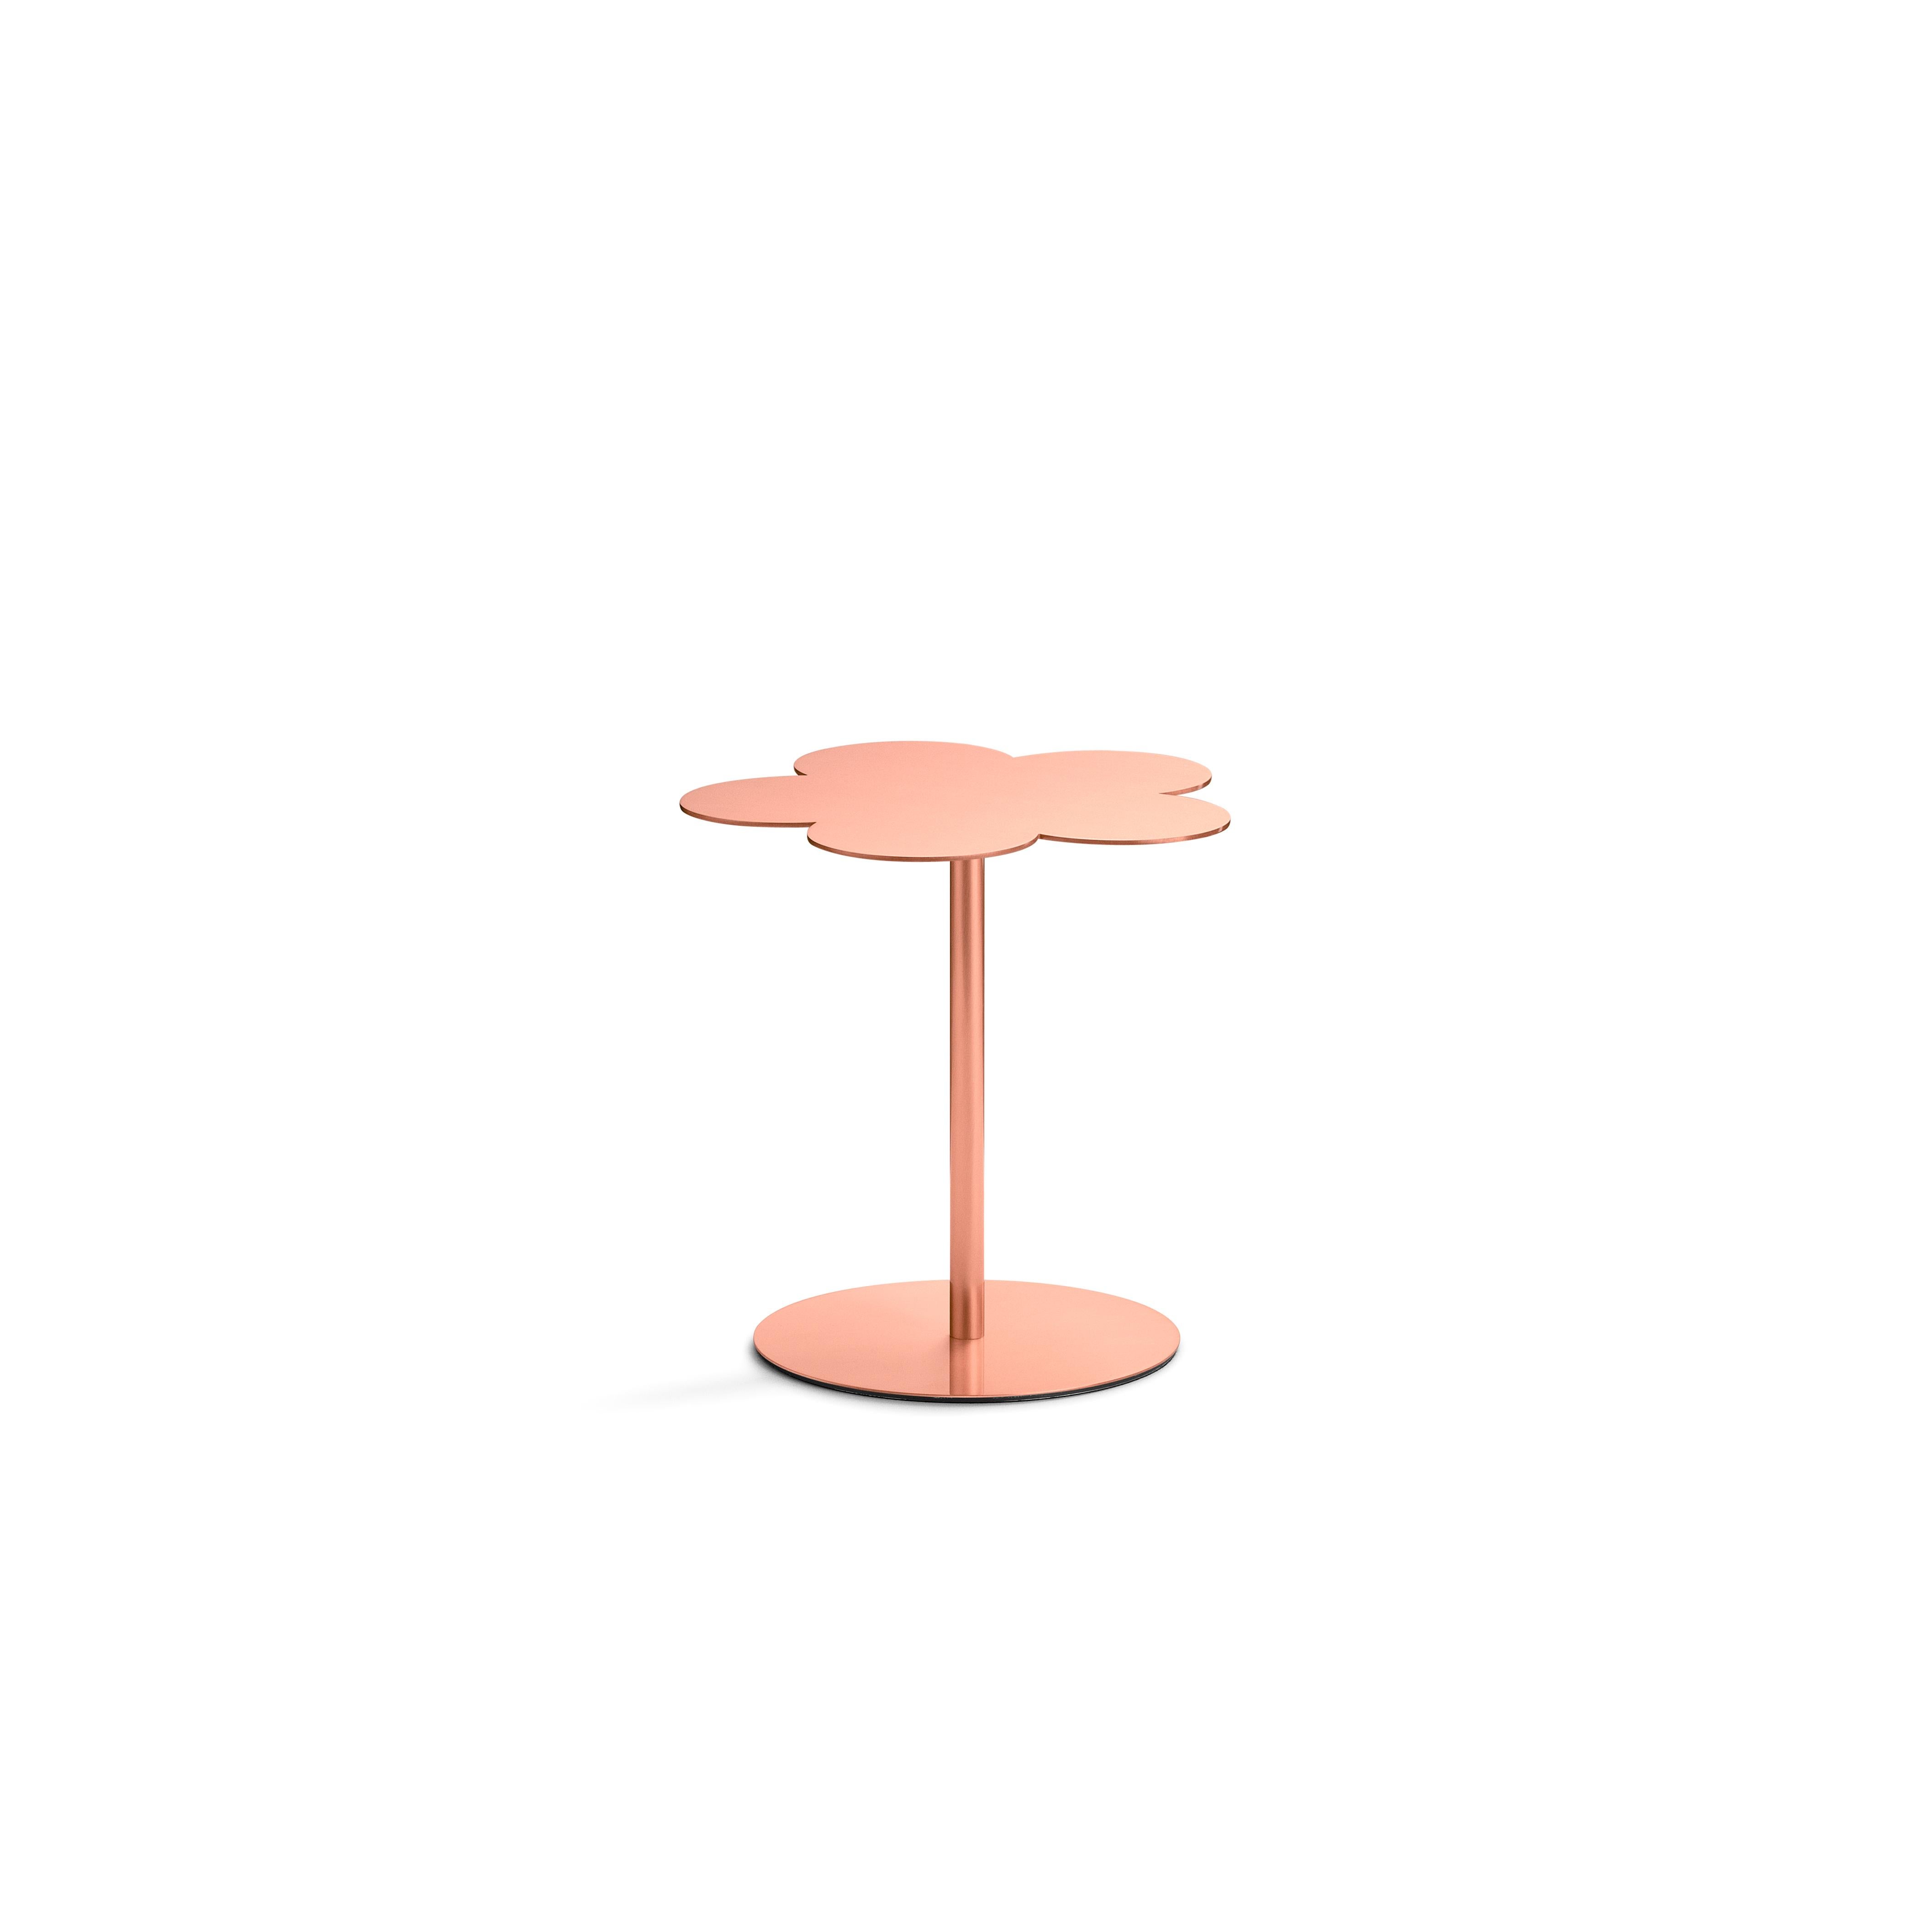 Small coffee side table in copper
The natural element is the focus of this project of a coffee table where the surface is shaped like a stylized flower. A triptych of distinct elements which rest on a circular foot and, given the different heights,